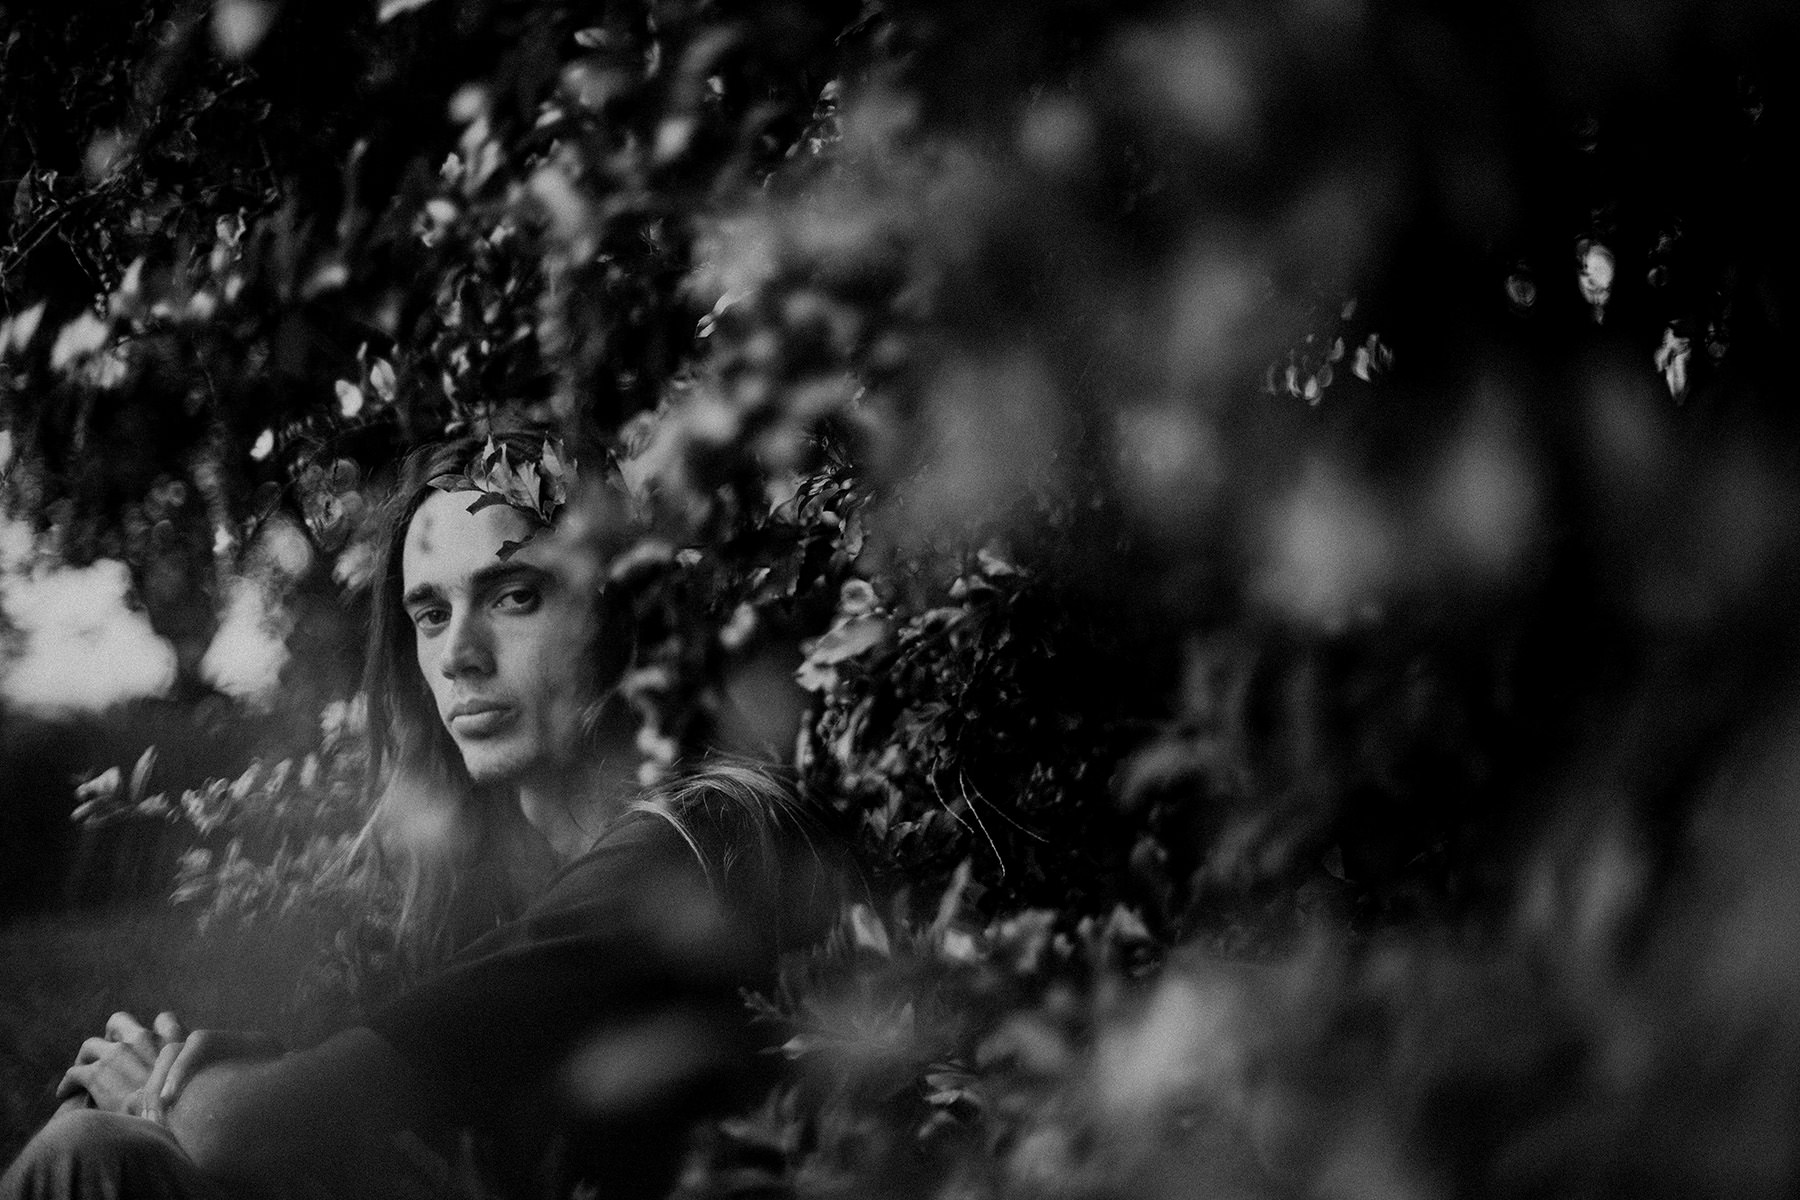 Portrait portfolio image of young man with long hair surrounded by foliage